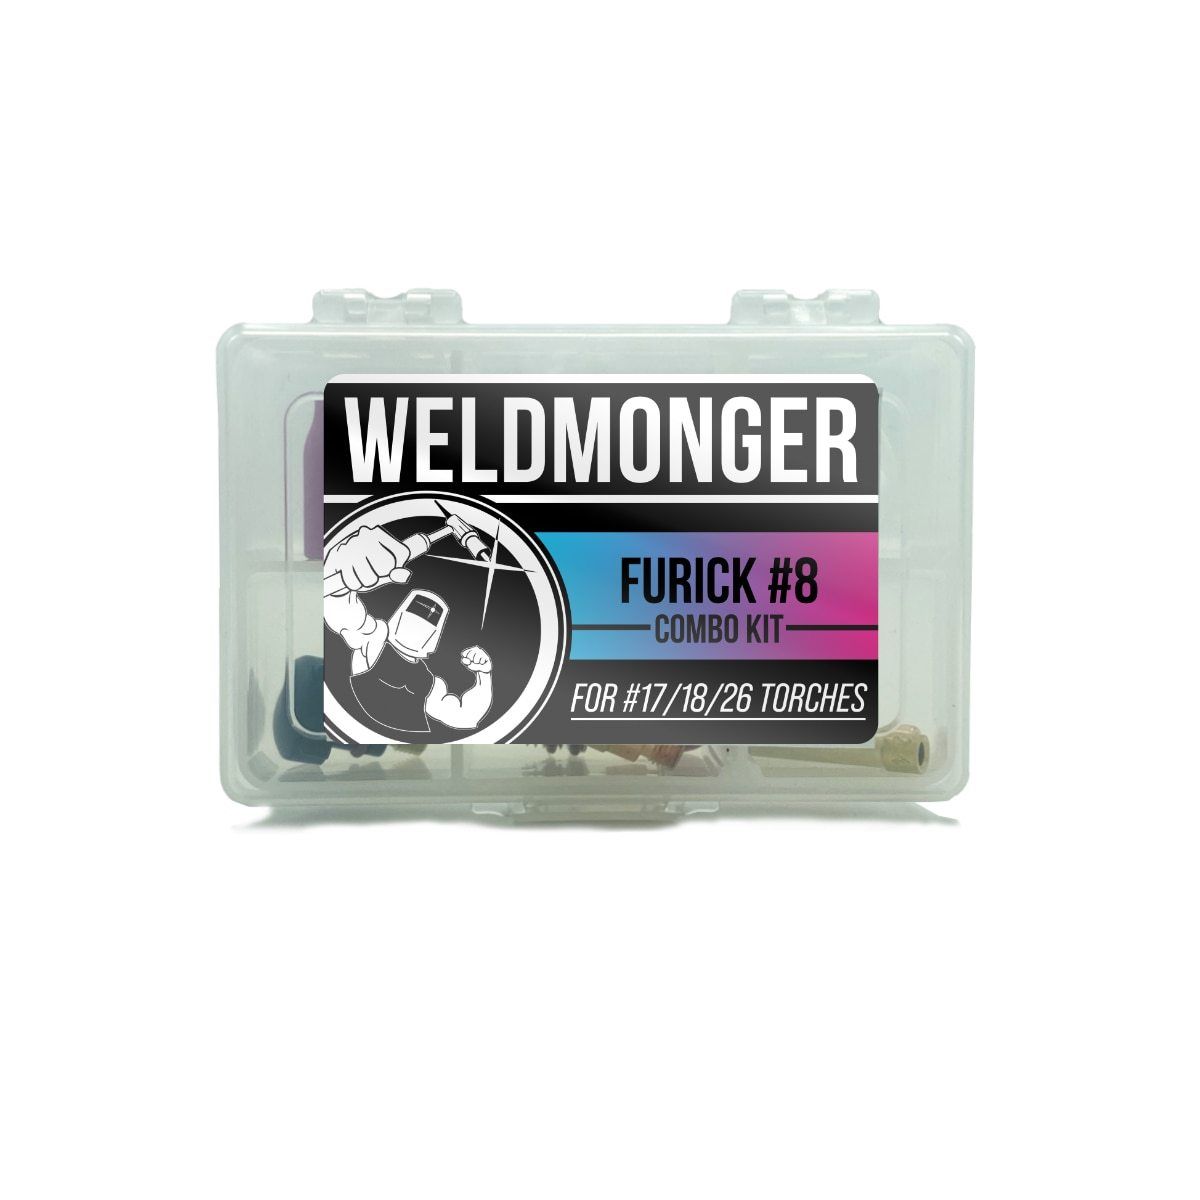 WELDMONGER® Furick #8 PRO Combo Kit, Size 3/32 - For 17,18,26 Style Torches